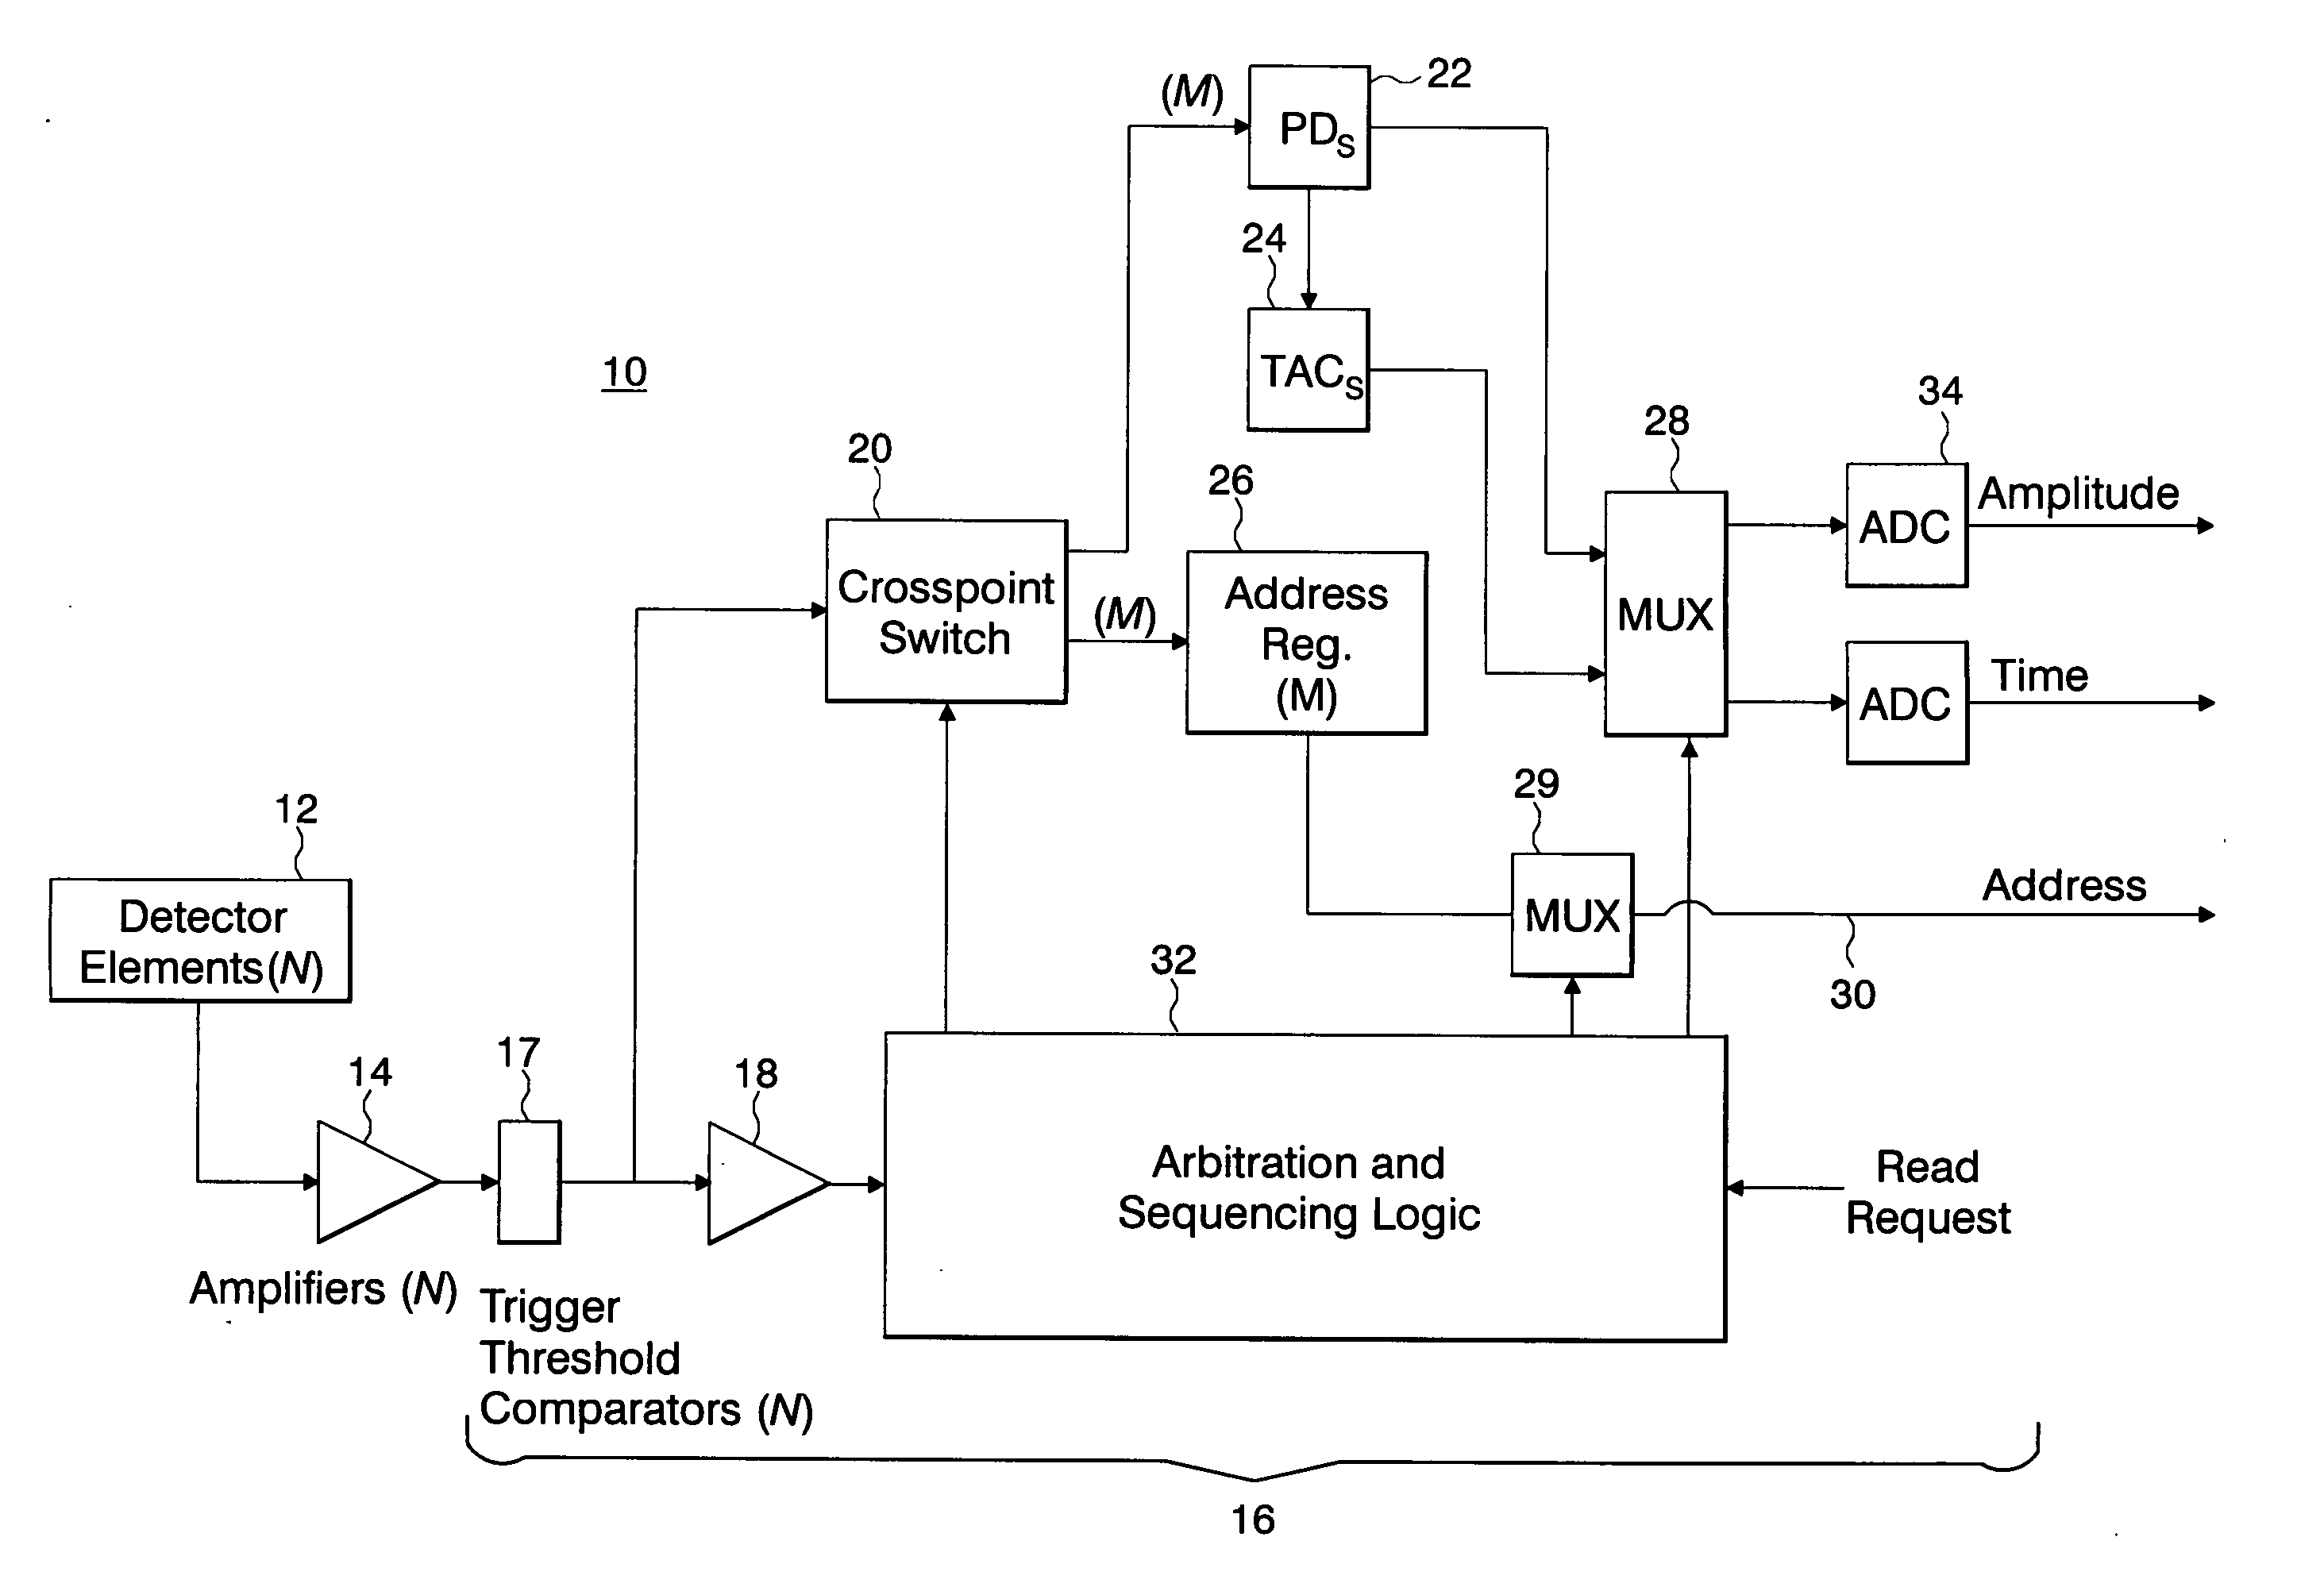 Method and apparatus for signal processing in a sensor system for use in spectroscopy